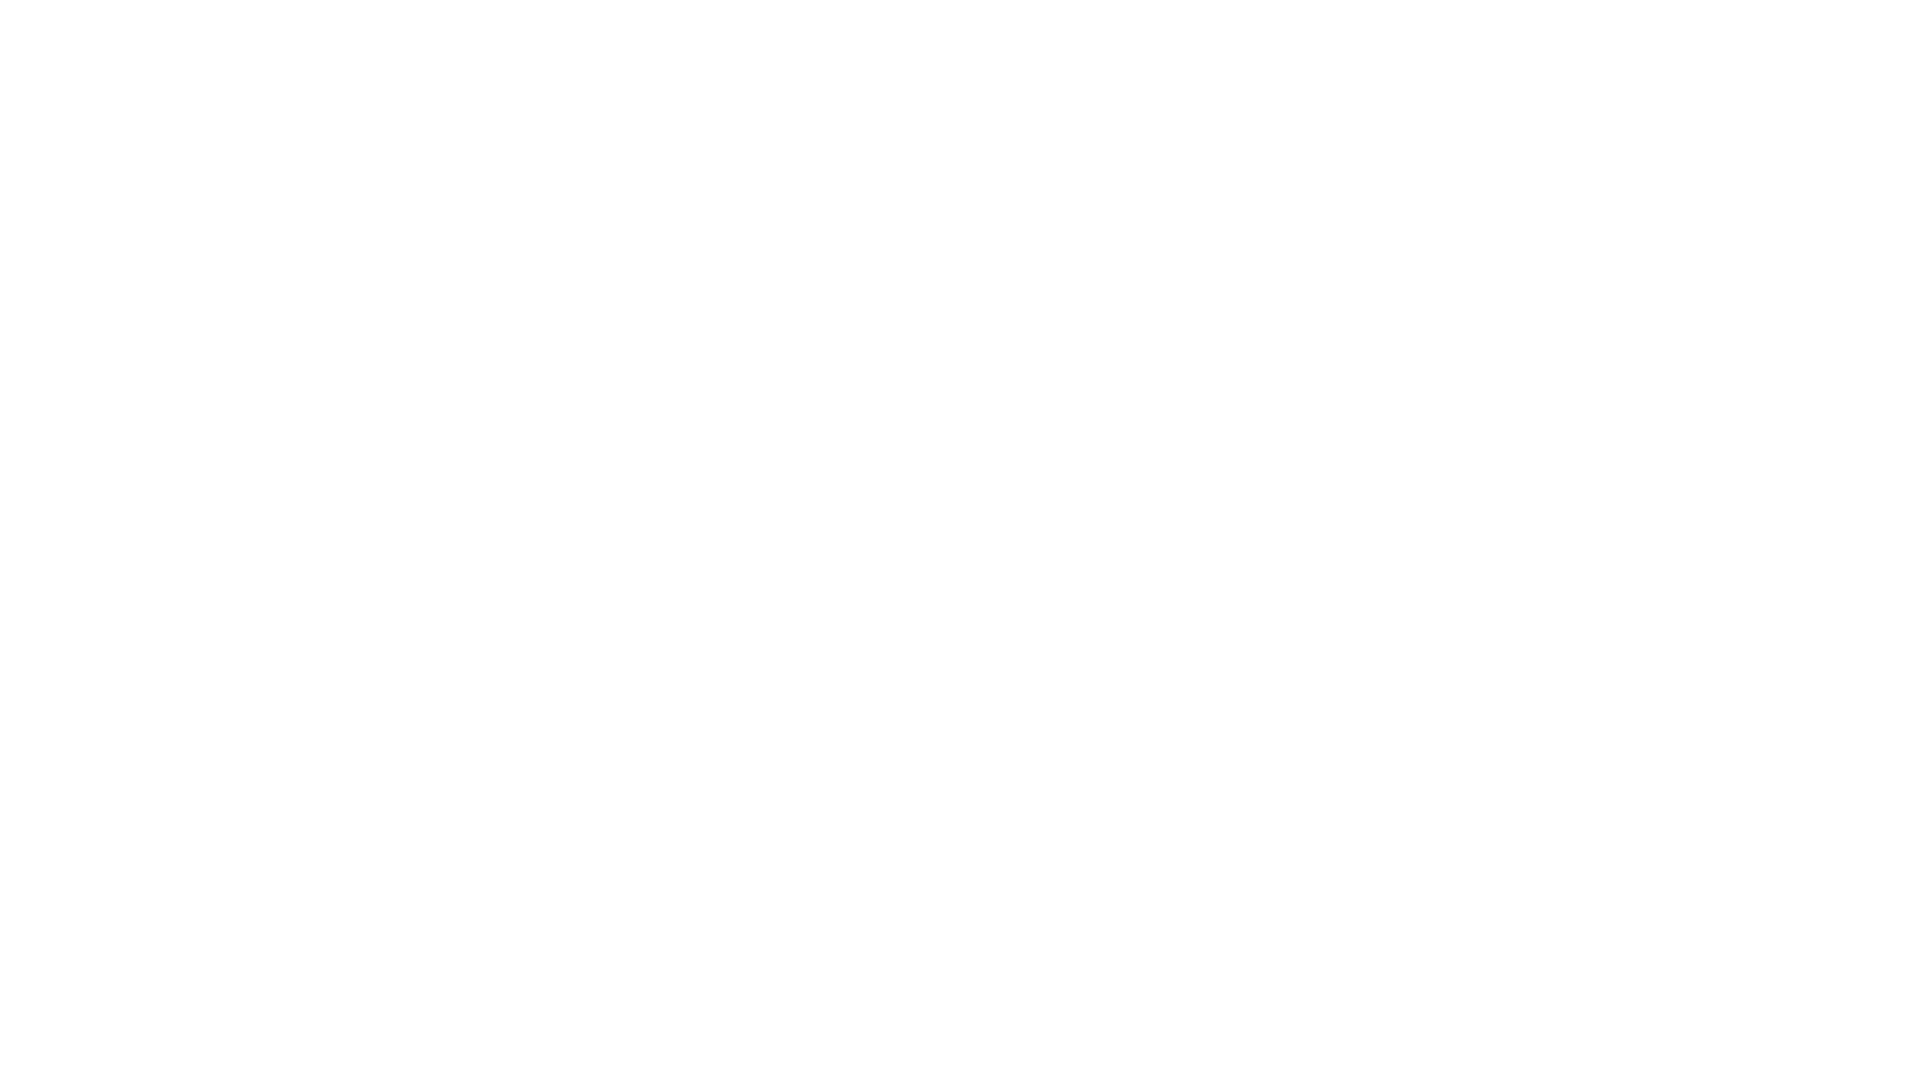 60 Seconds for Social